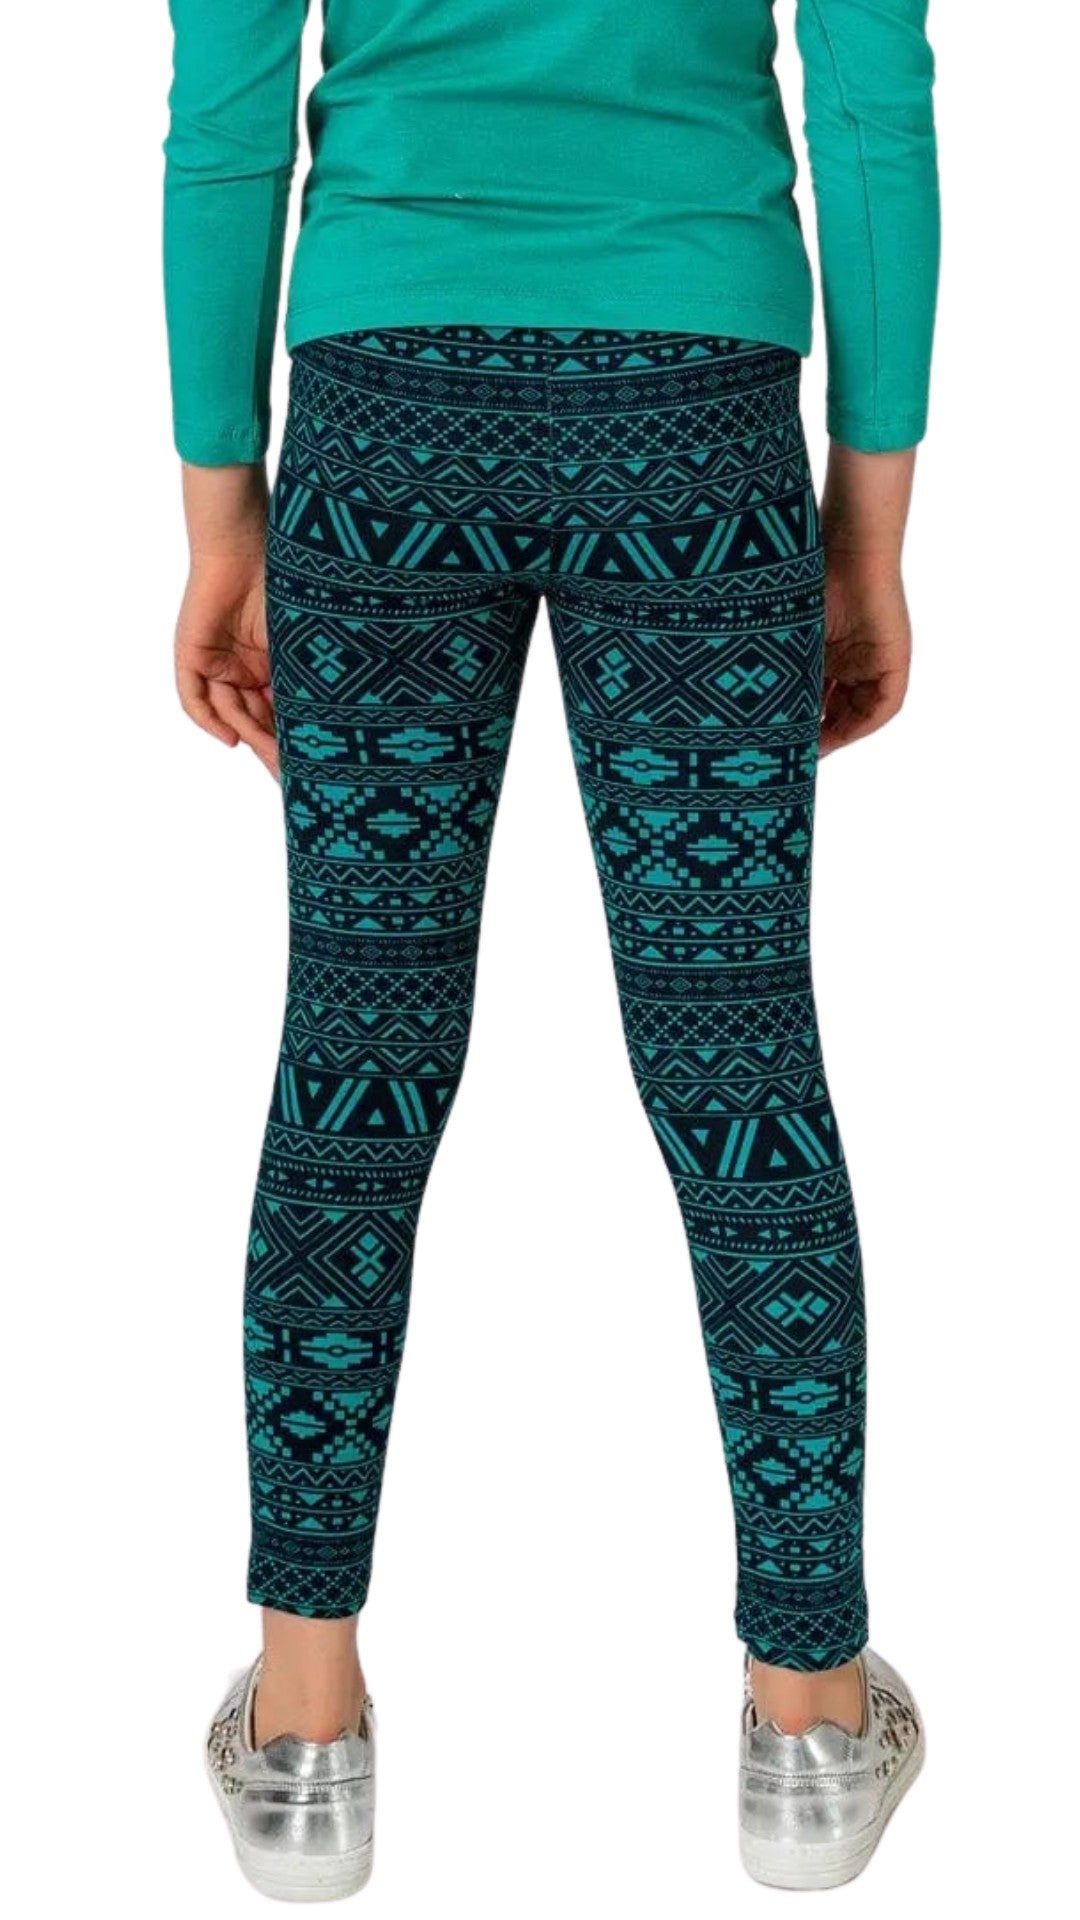 Women's Leggings and Pants – Stretch Is Comfort